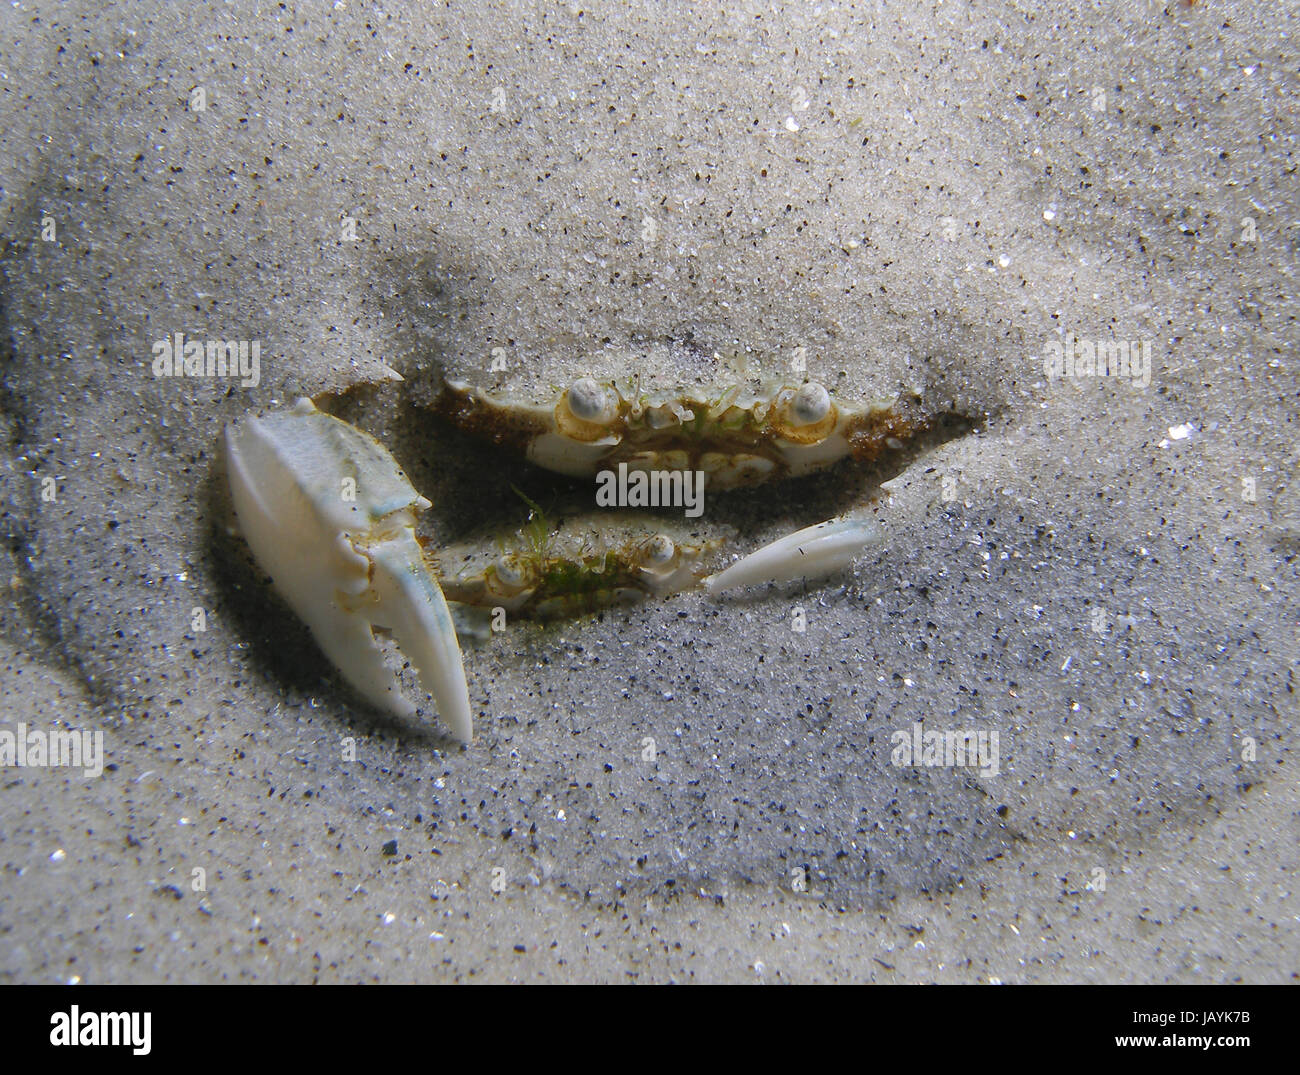 Couple of crabs hidden inside the sand Stock Photo